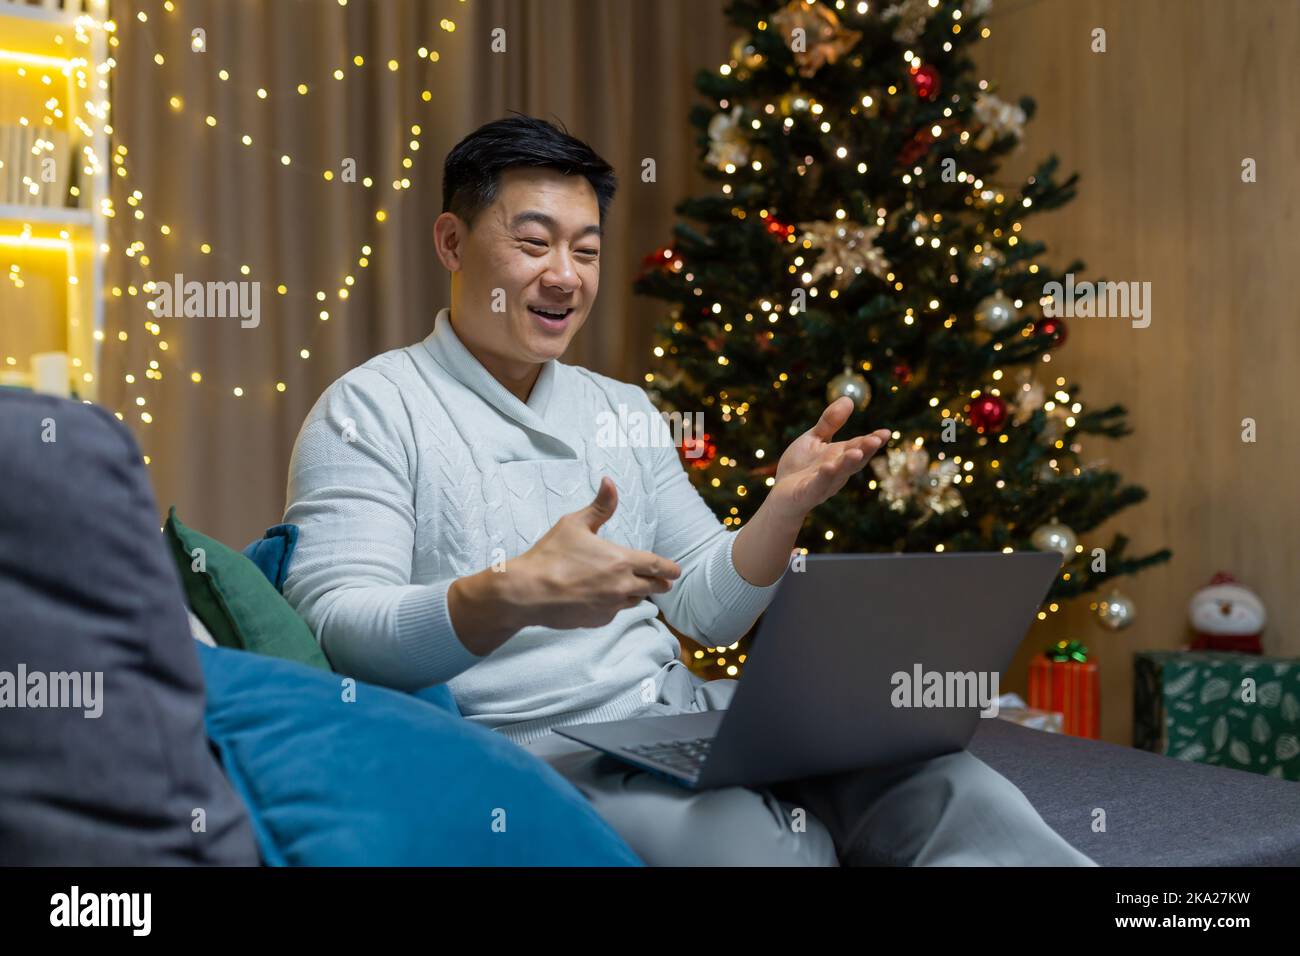 Quarantine for holidays. Young handsome Asian man sitting at home on sofa alone on New Year near Christmas tree. Holds a laptop, talks to family, friends via online video call. Stock Photo